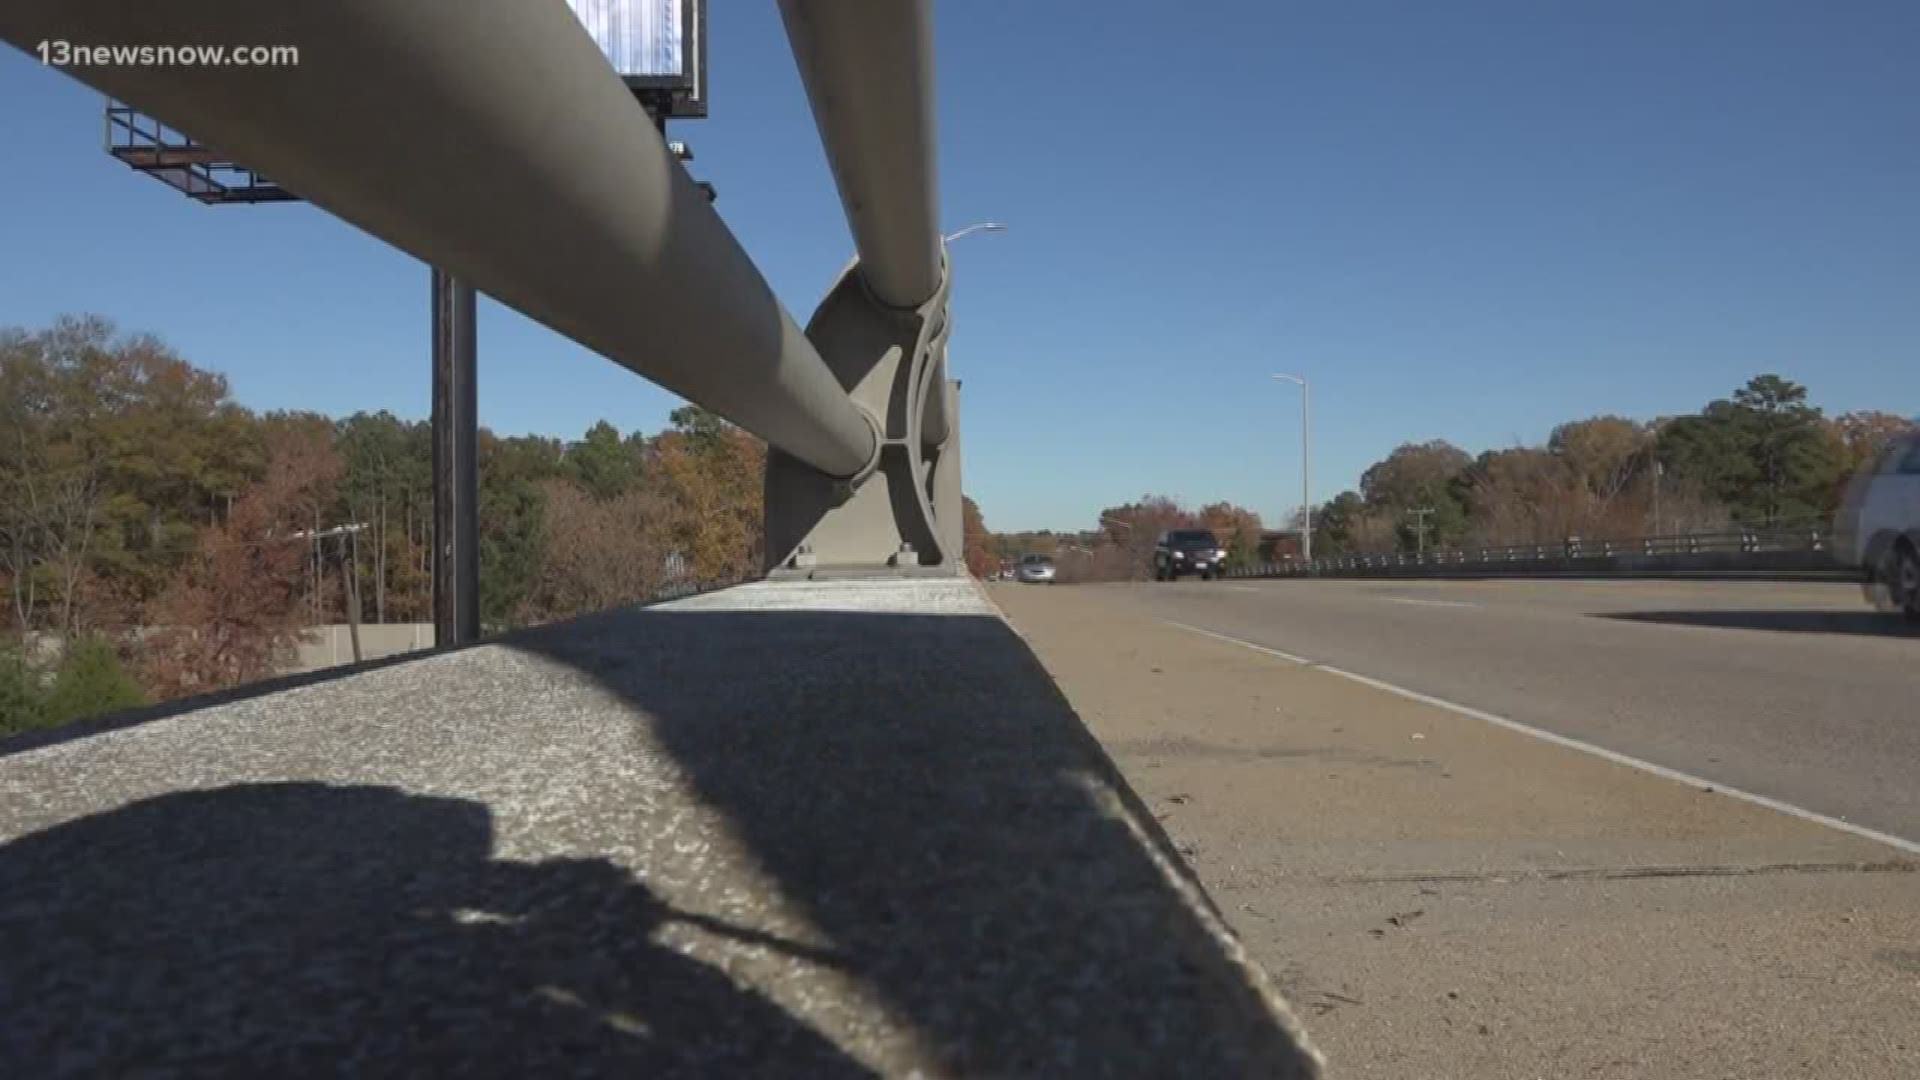 Construction will begin to replace the bridge over Interstate 64 with a new bridge that meets current design standards.